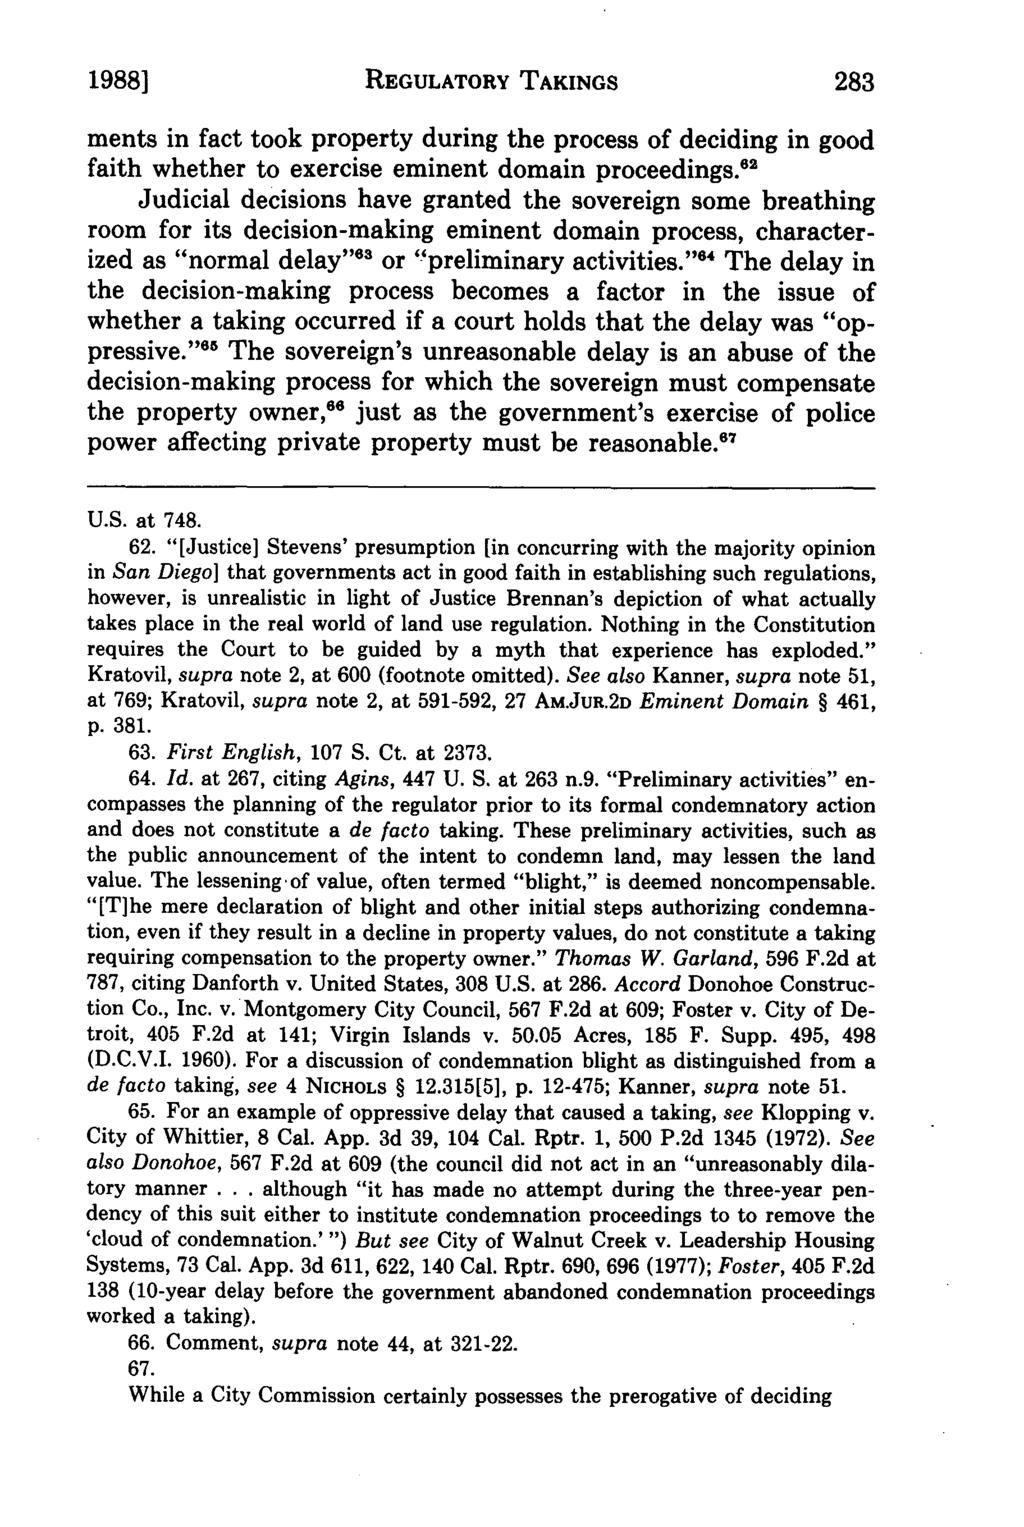 1988] Woodard: Constitutional Law: Is Time Running out for the Government to Dis REGULATORY TAKINGS ments in fact took property during the process of deciding in good faith whether to exercise